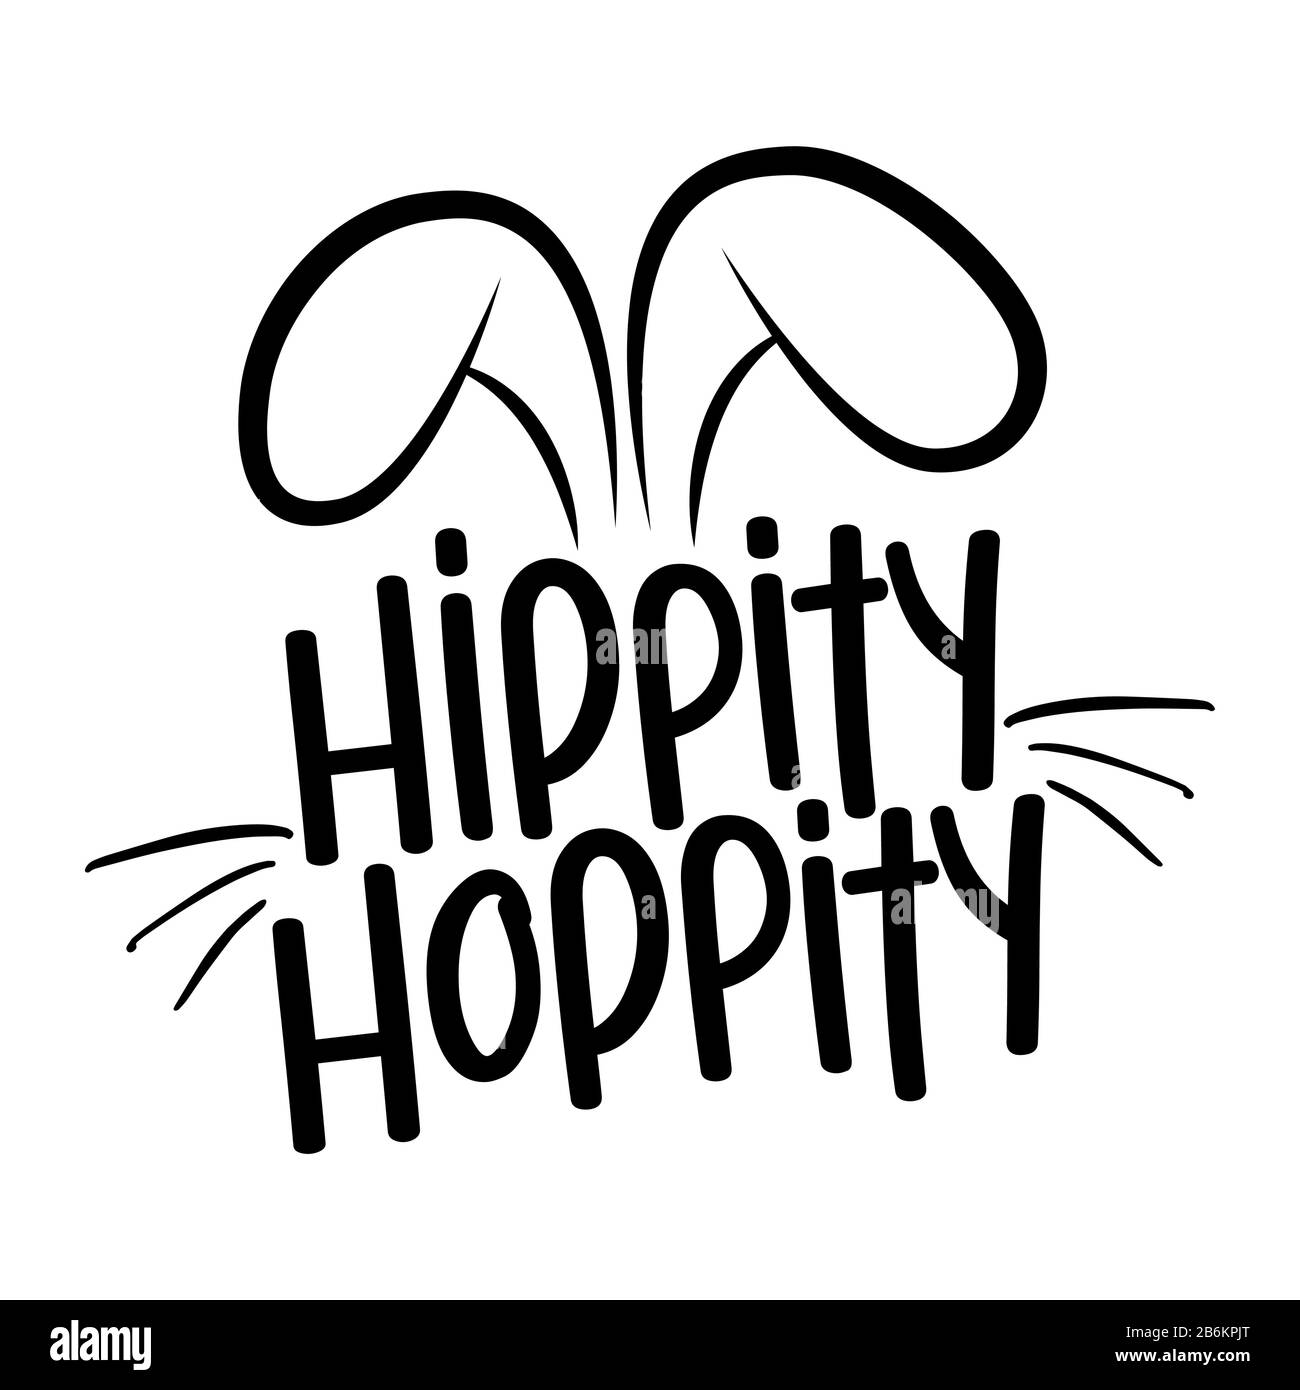 Hippity Hoppity - Cute bunny design, funny hand drawn doodle, cartoon Easter rabbit. Good for children's book, poster or t-shirt textile graphic desig Stock Vector